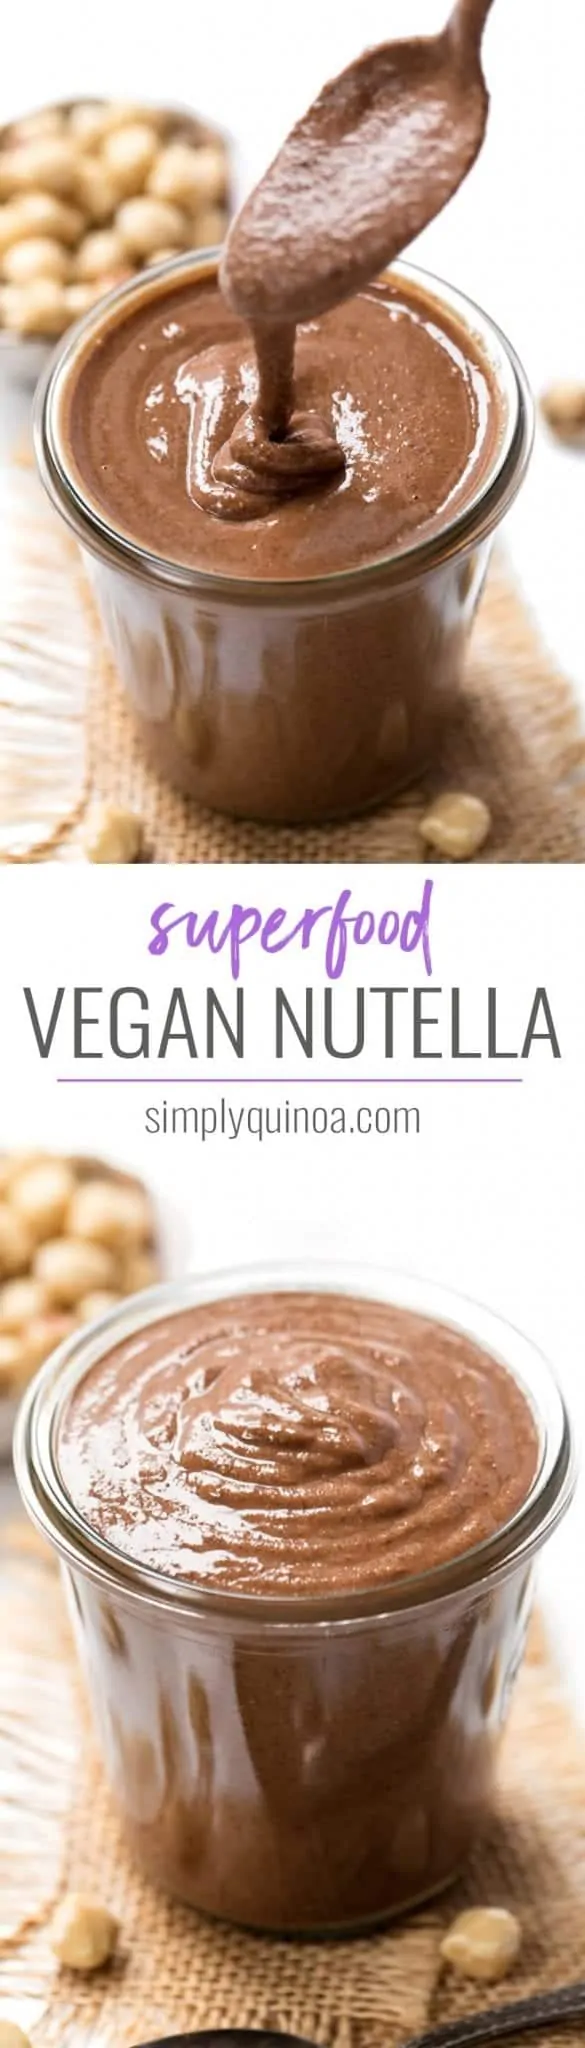 how to make healthy vegan nutella using superfoods